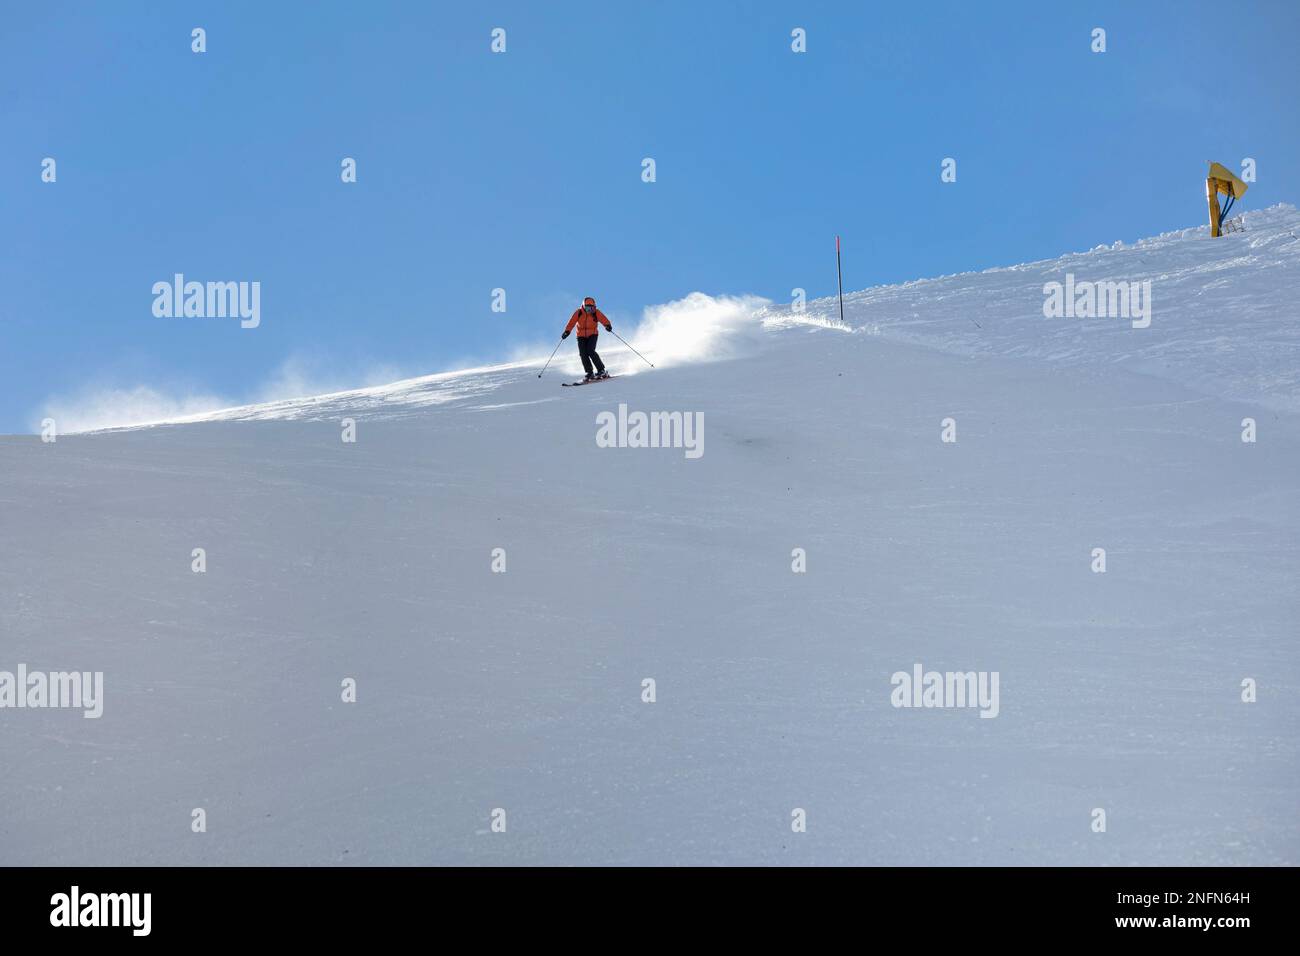 A young female skier in an orange jacket turns carving arches on the slope. A beautiful sunny day in the mountains, on the ski slope, a skier in an or Stock Photo